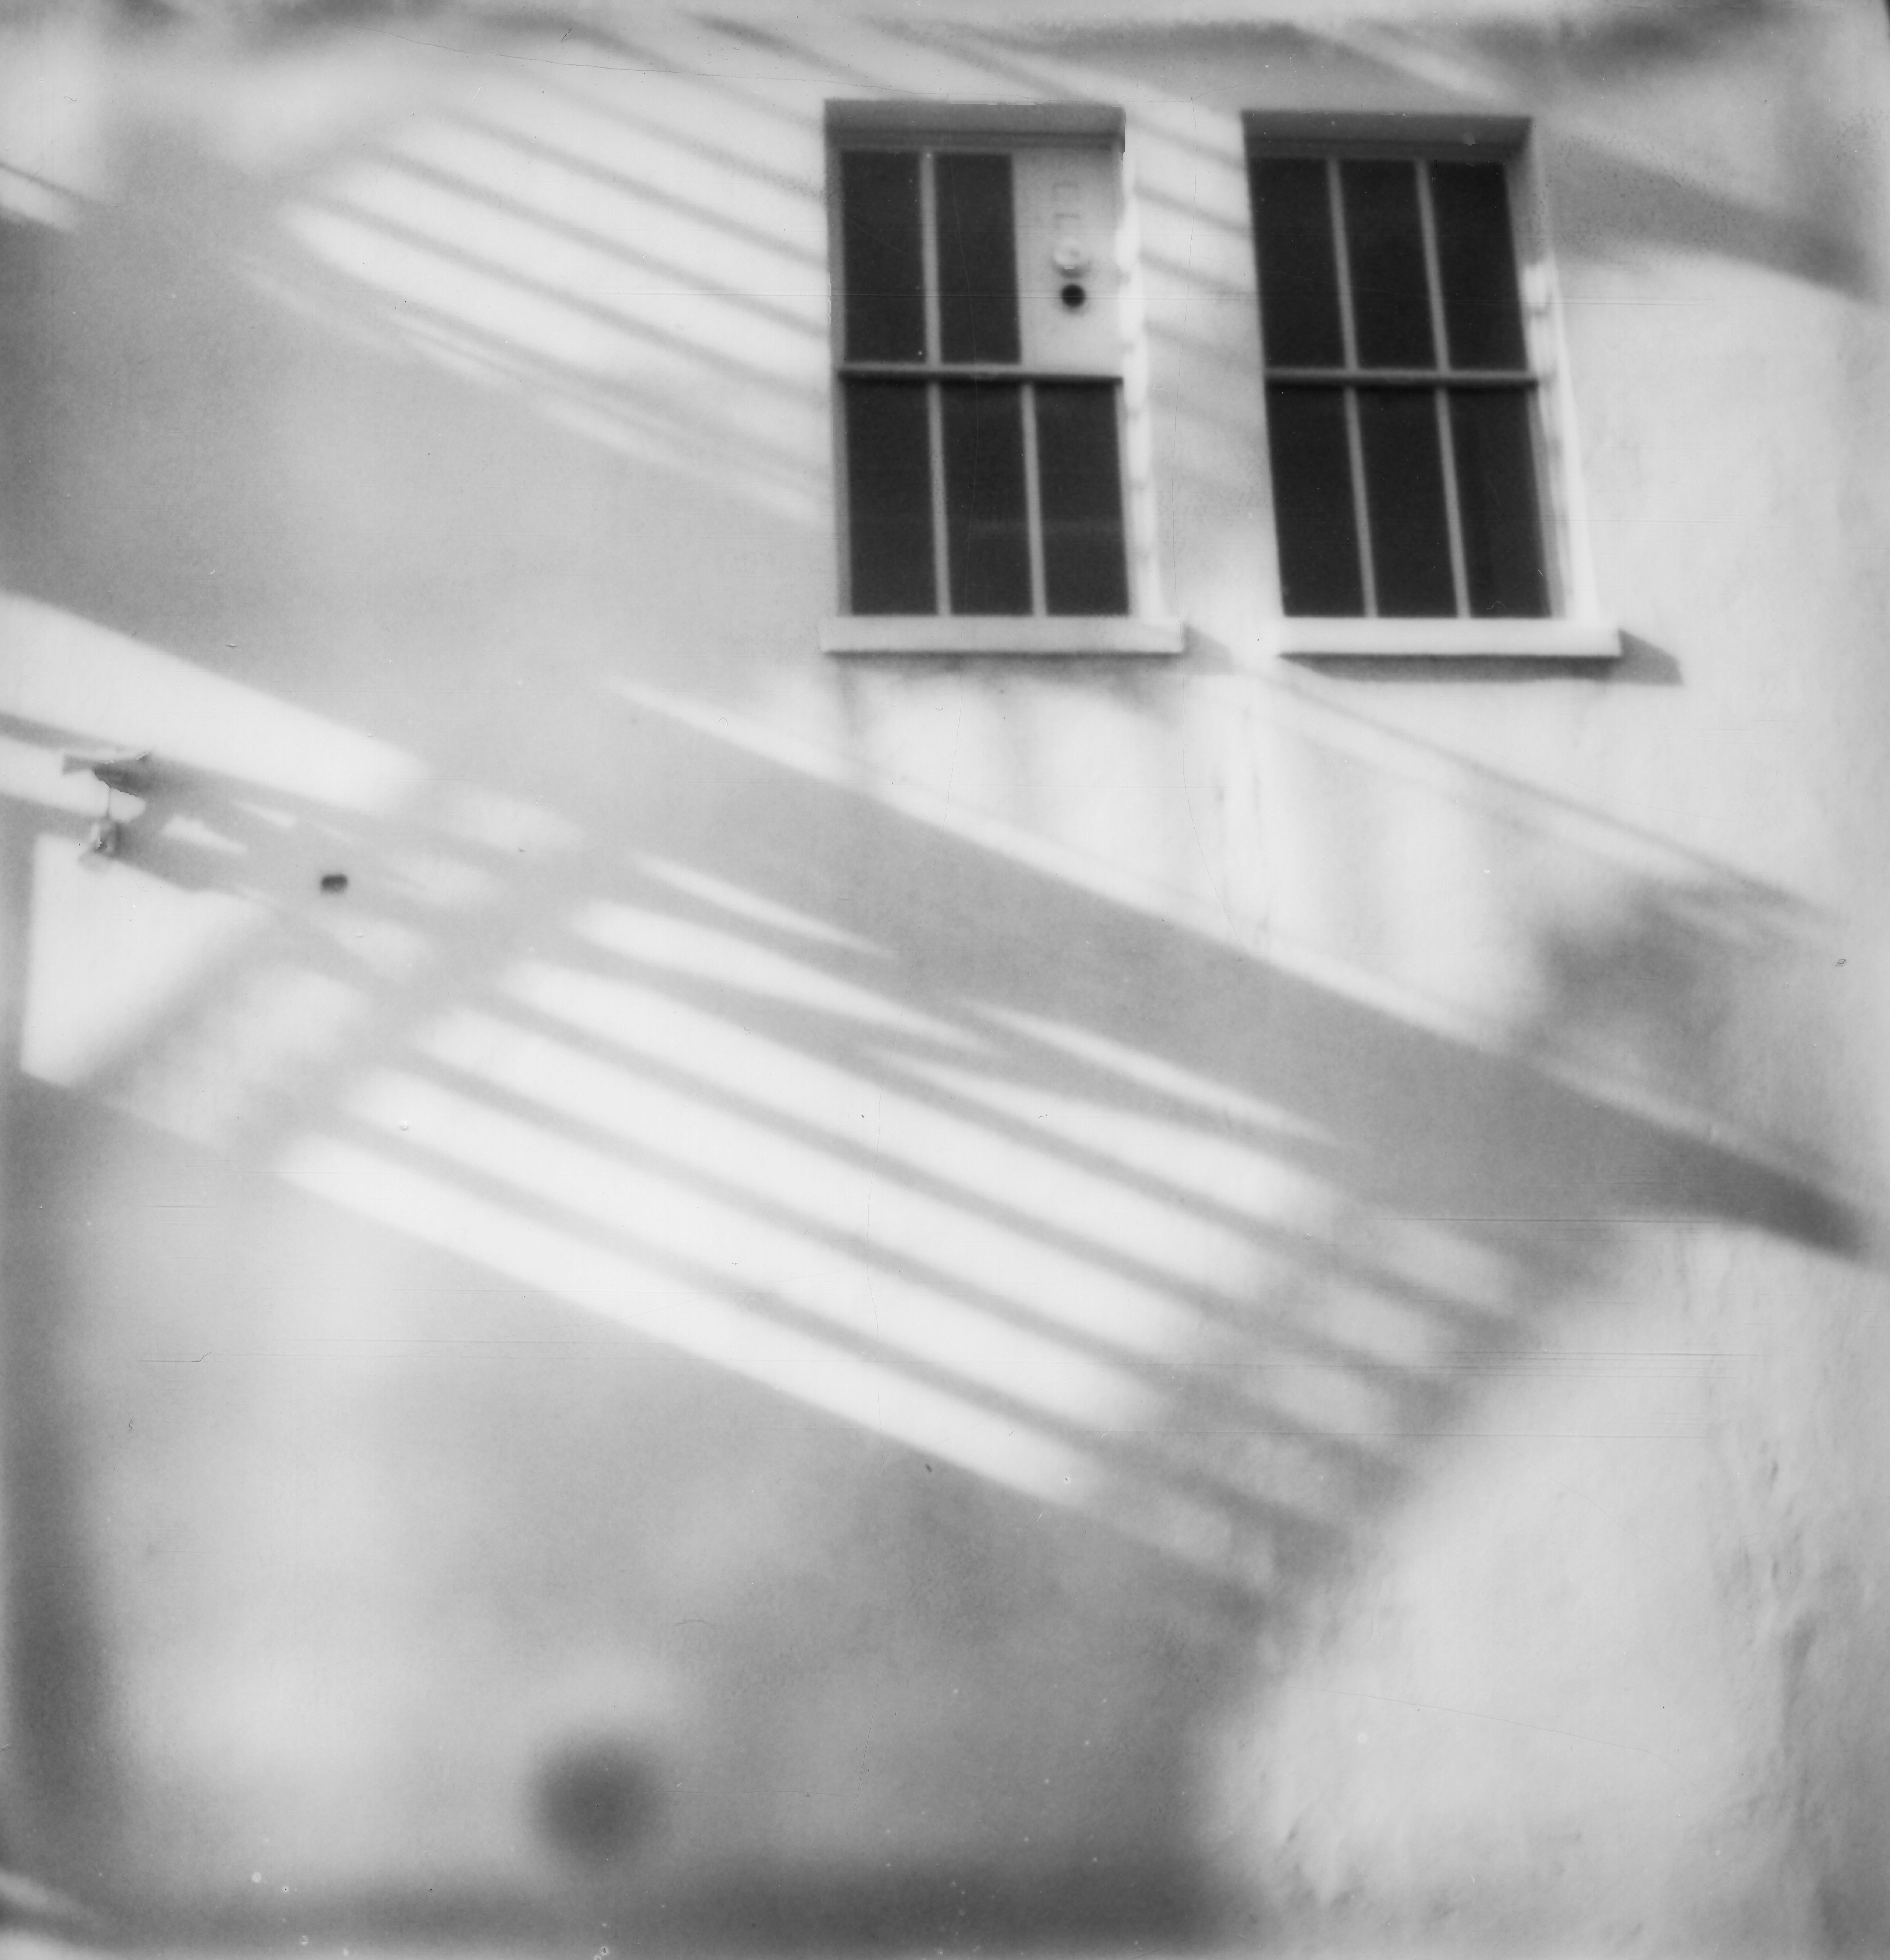 Erin Dougherty Landscape Photograph - Light and Shadow (Ghost Town) - 21st Century, Polaroid, Landscape